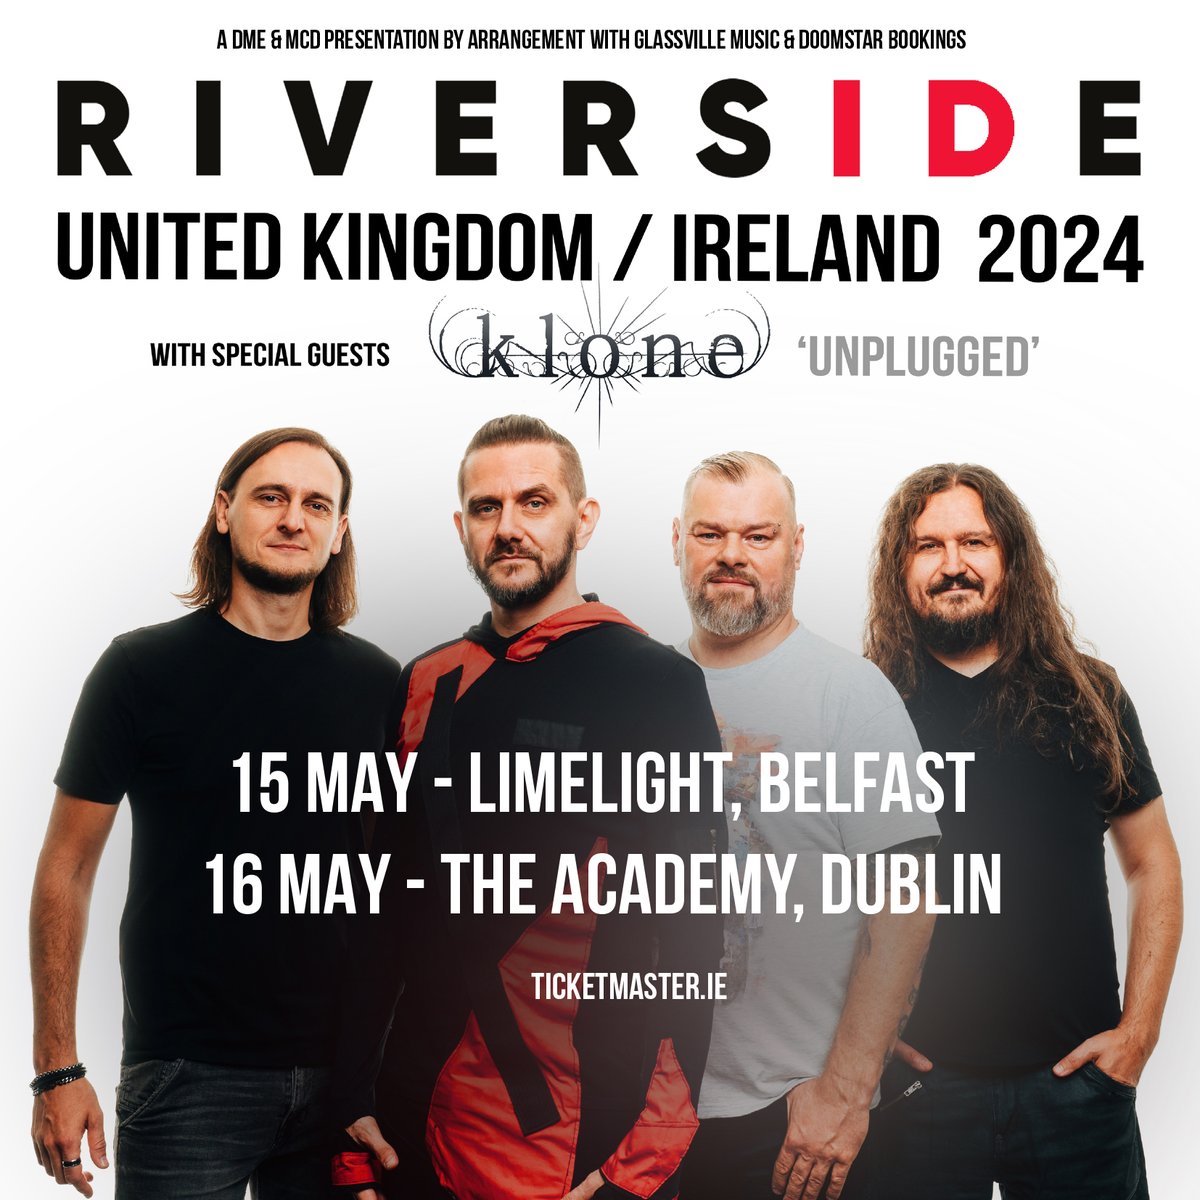 Less than 2 weeks 'til RIVERSIDE hit @LimelightNI & @academydublin with special guests KLONE. Tickets on sale from Ticketmaster 🔥